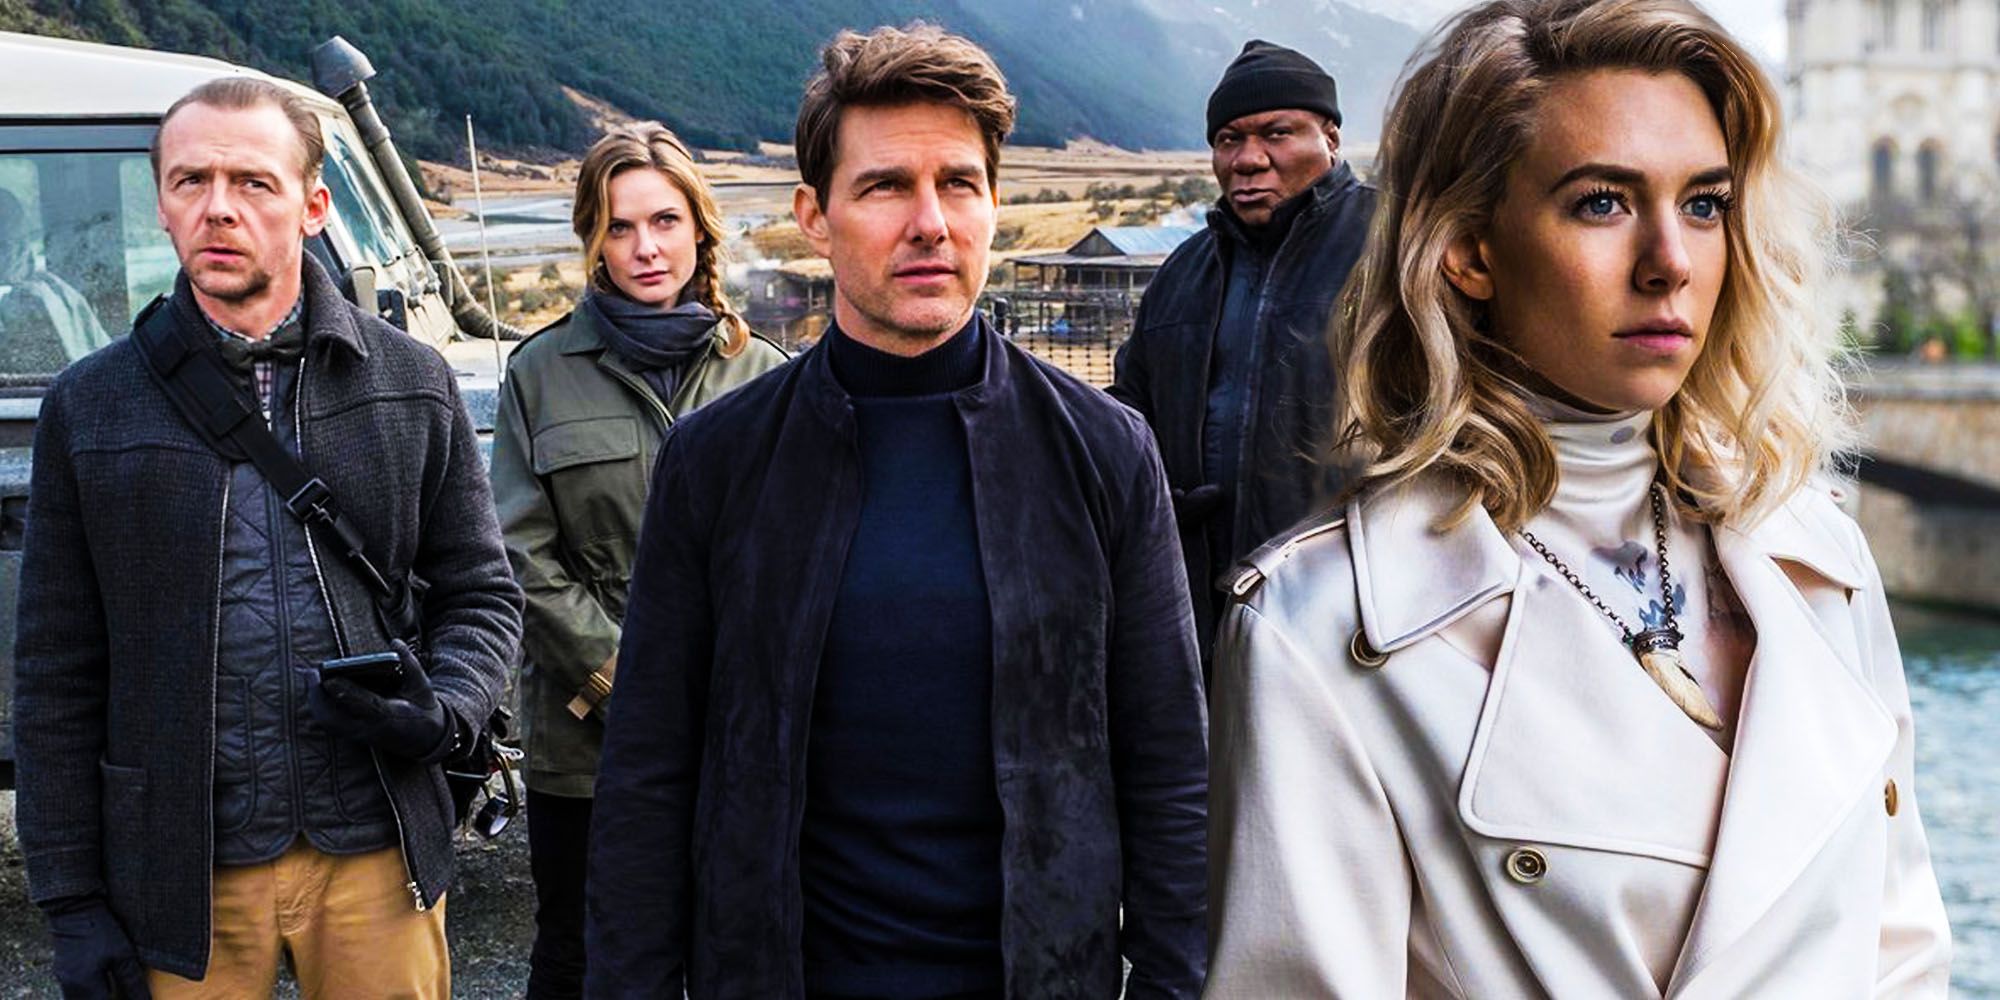 Mission impossible 7 best in the franchise ethan hunt tom cruise